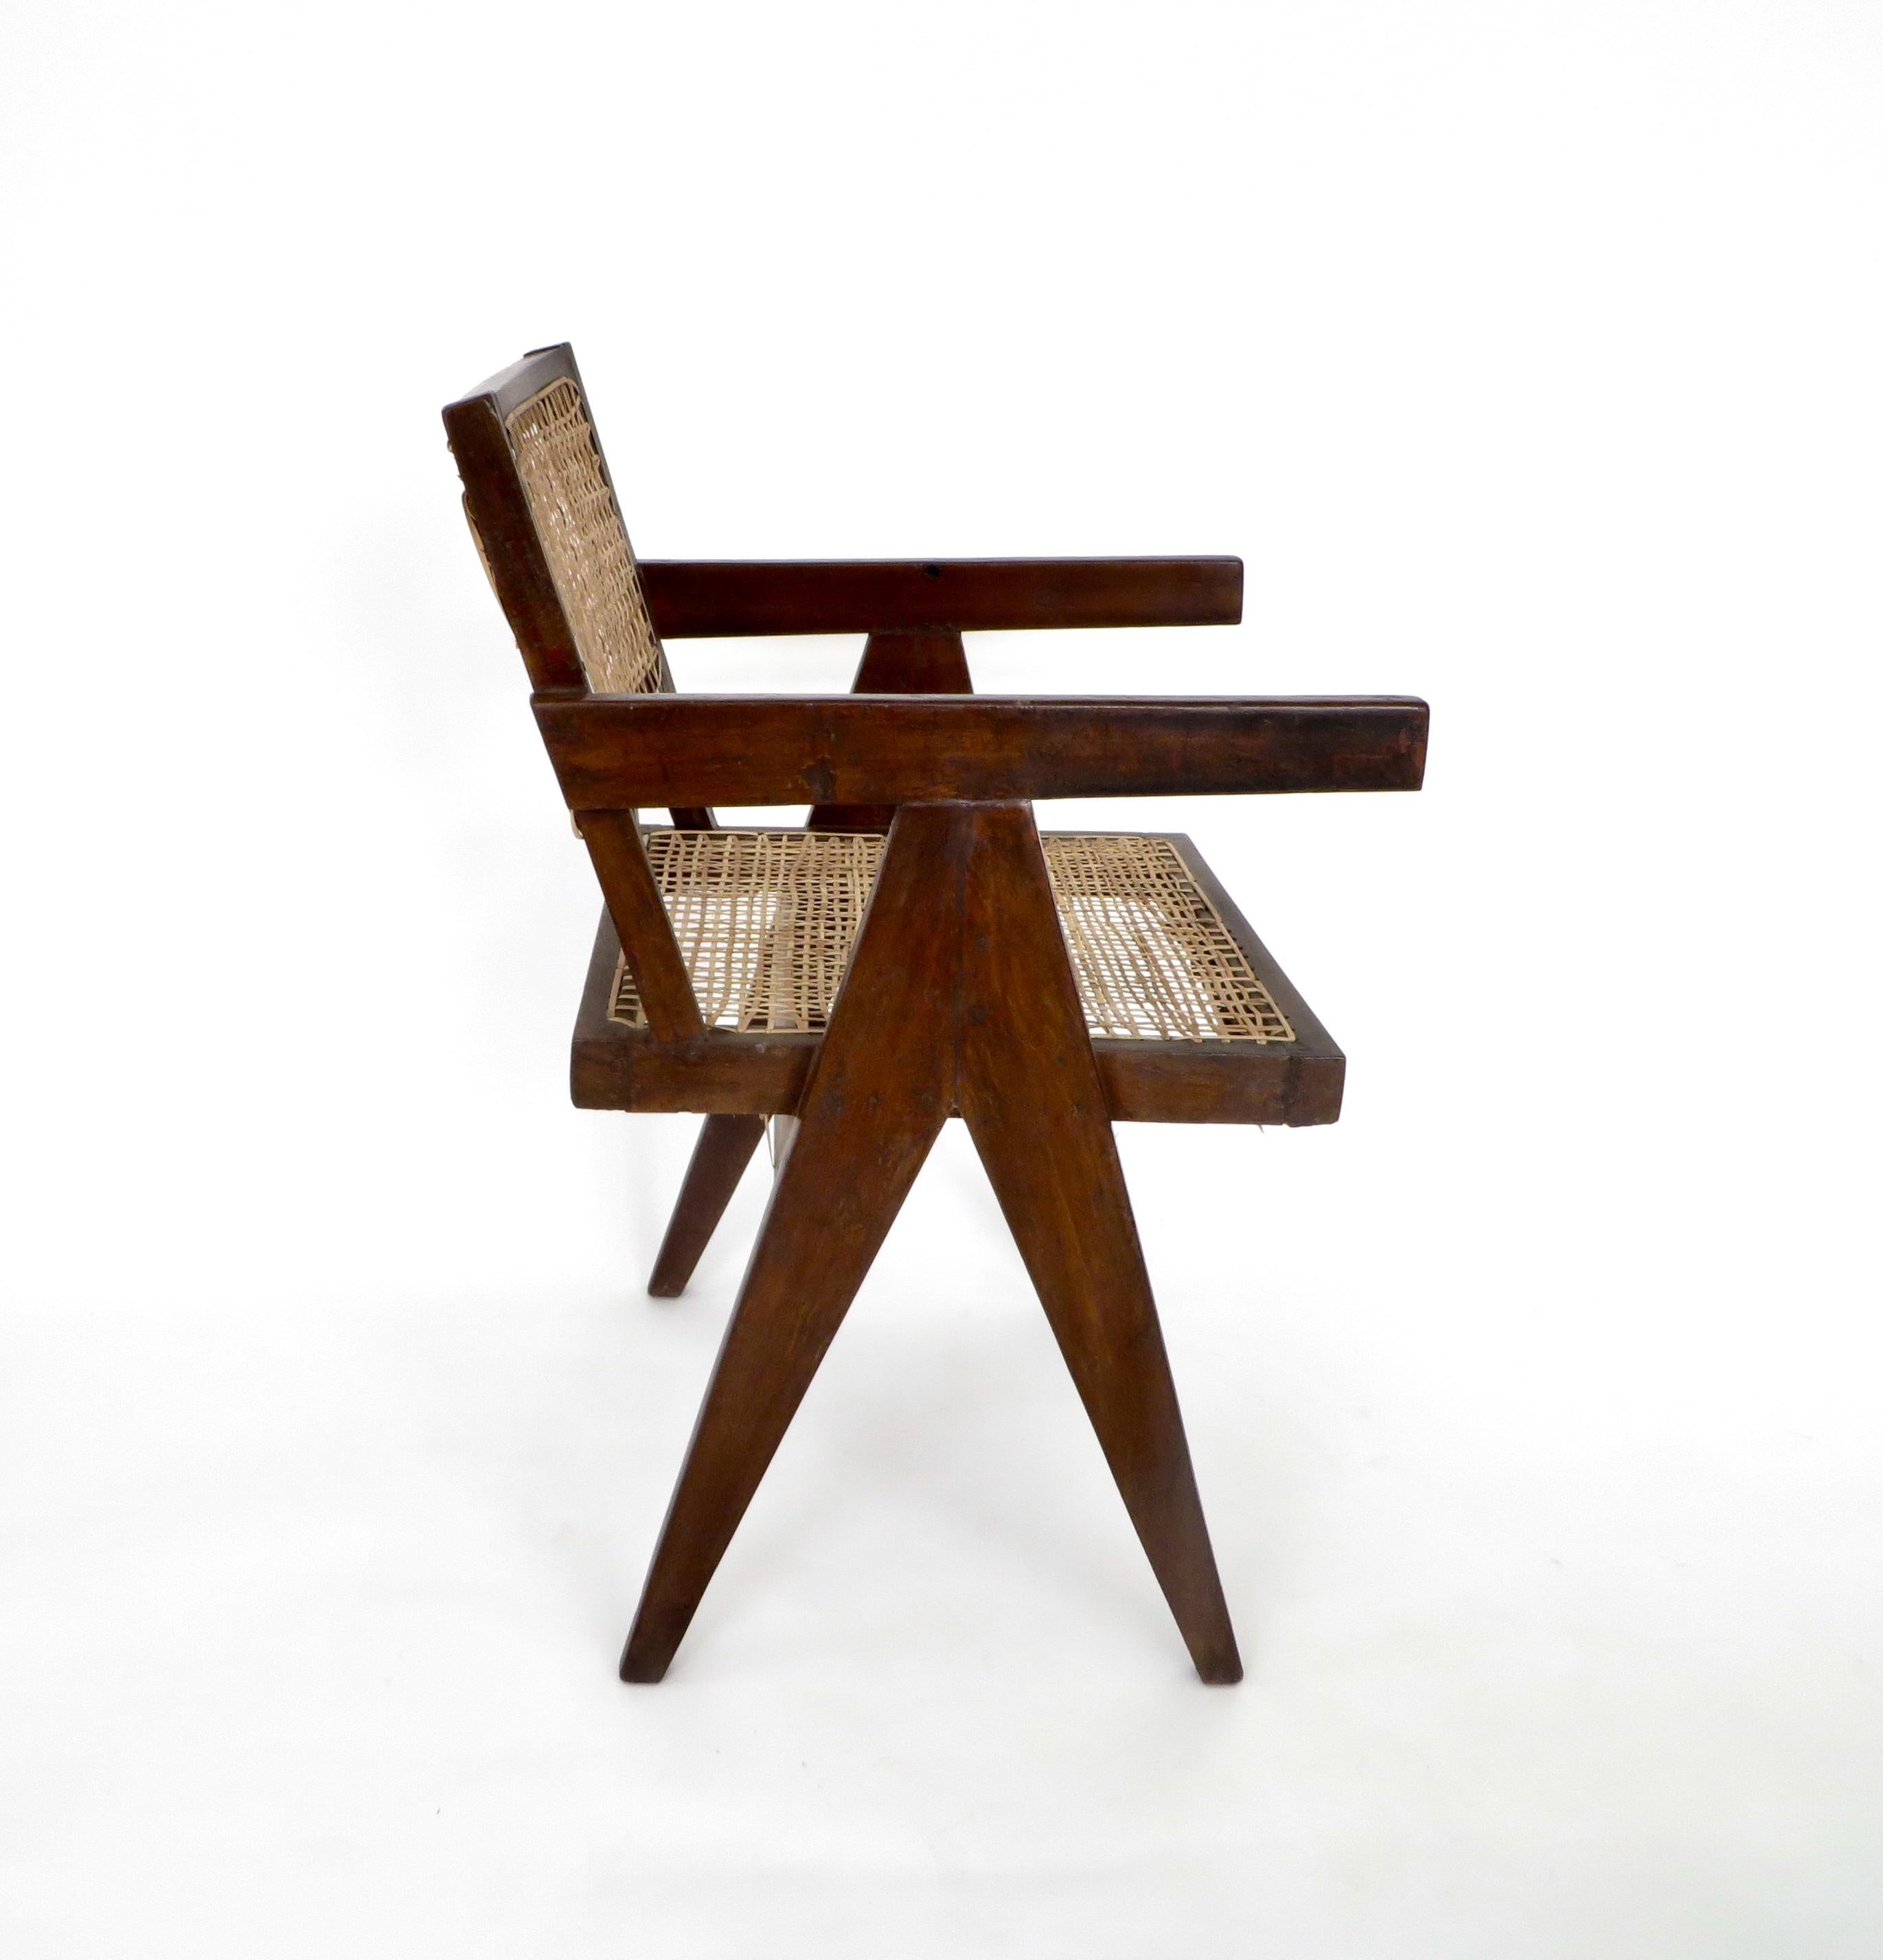 A single armchair called office cane chair by Pierre Jeanneret (1896-1967) from Chandigarh.
In teak with cushion and with bended and slightly curved back.
Cane seat and back, circa 1956.
This example has been restored with a wax finish.
Signs of